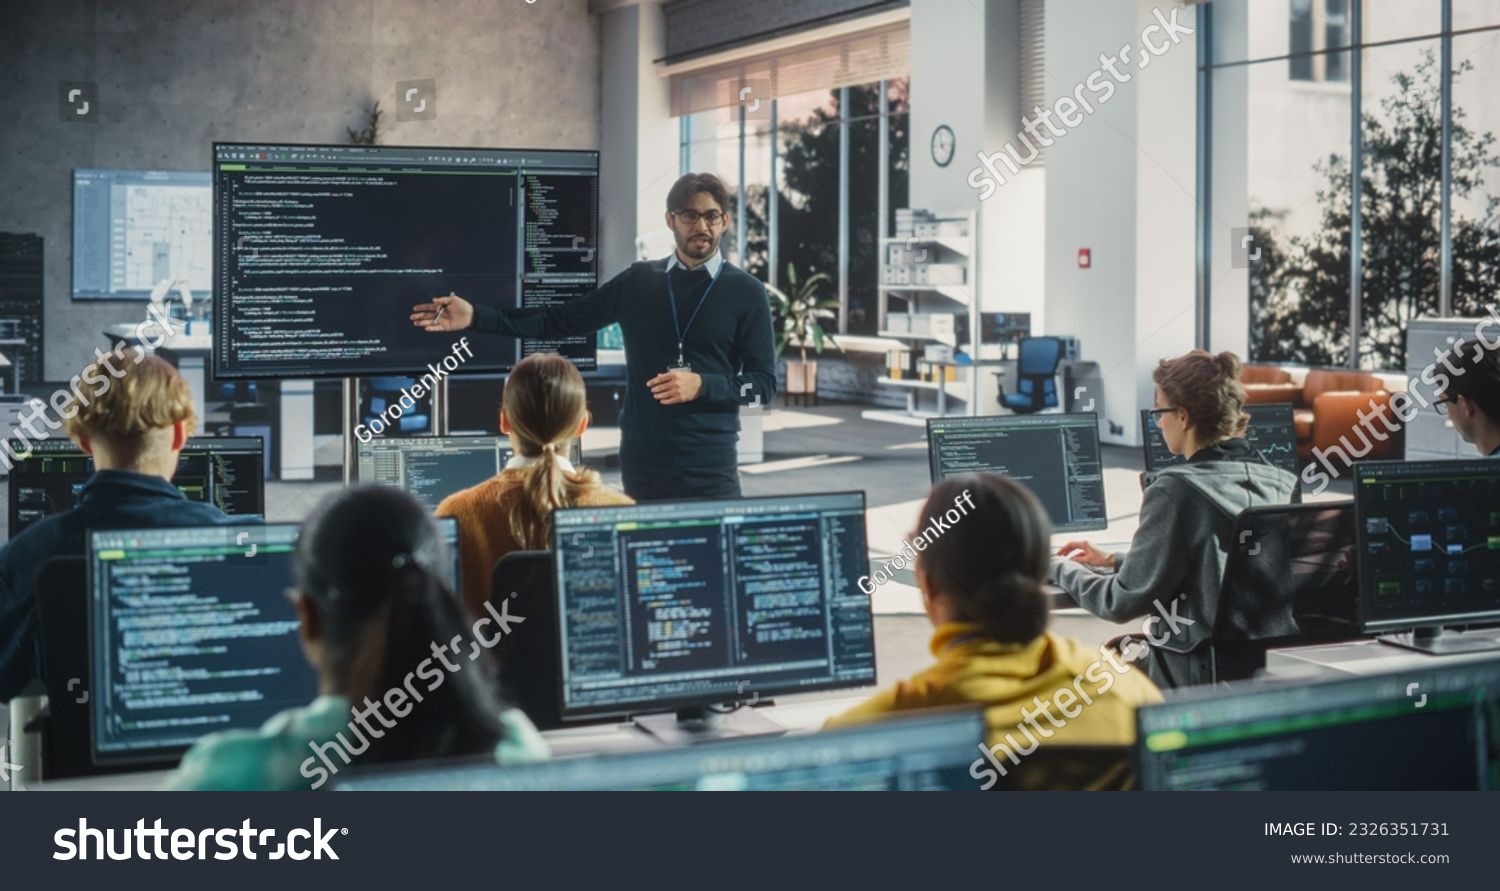 Knowledgeable Teacher Giving a Lecture About Software Engineering to a Group of Smart Diverse University Students. International Undergraduates Sitting Behind Desks with Computers #2326351731